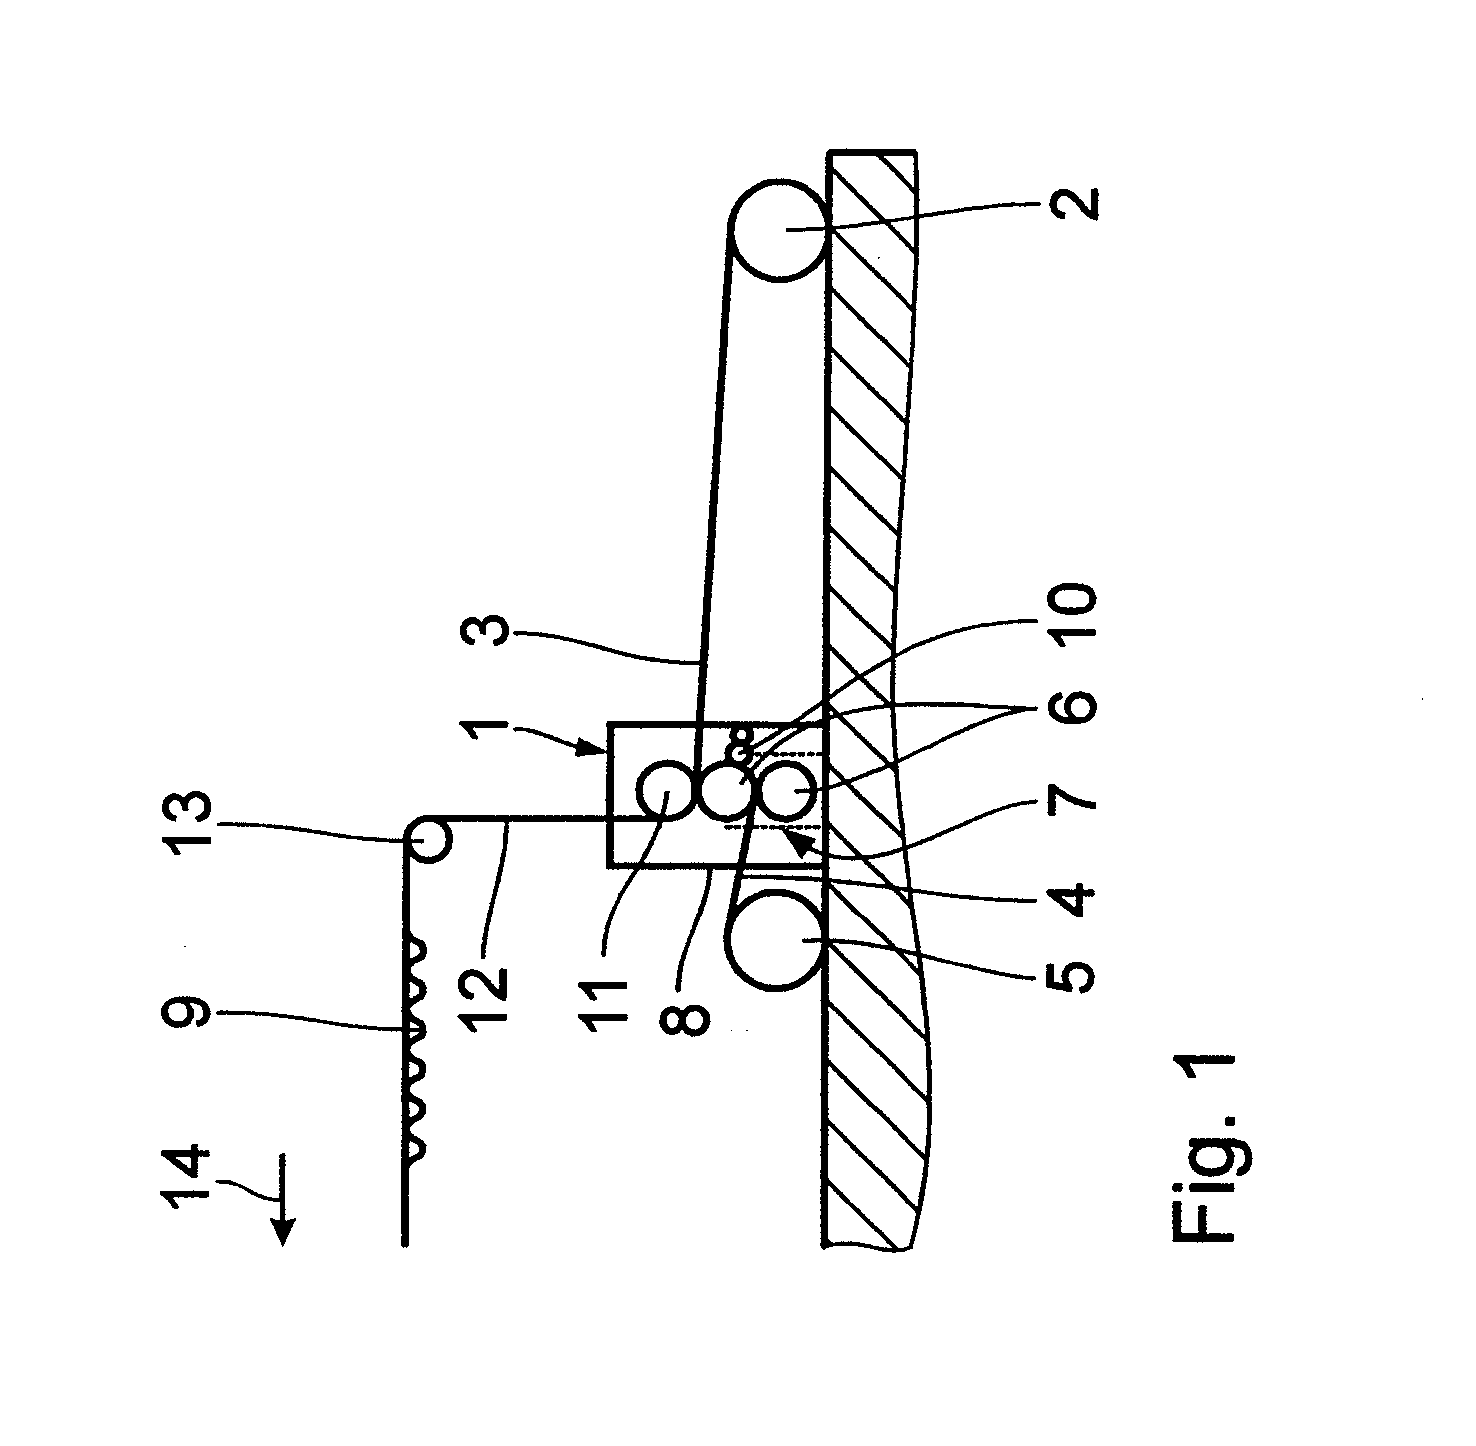 Apparatus for the manufacture of corrugated board